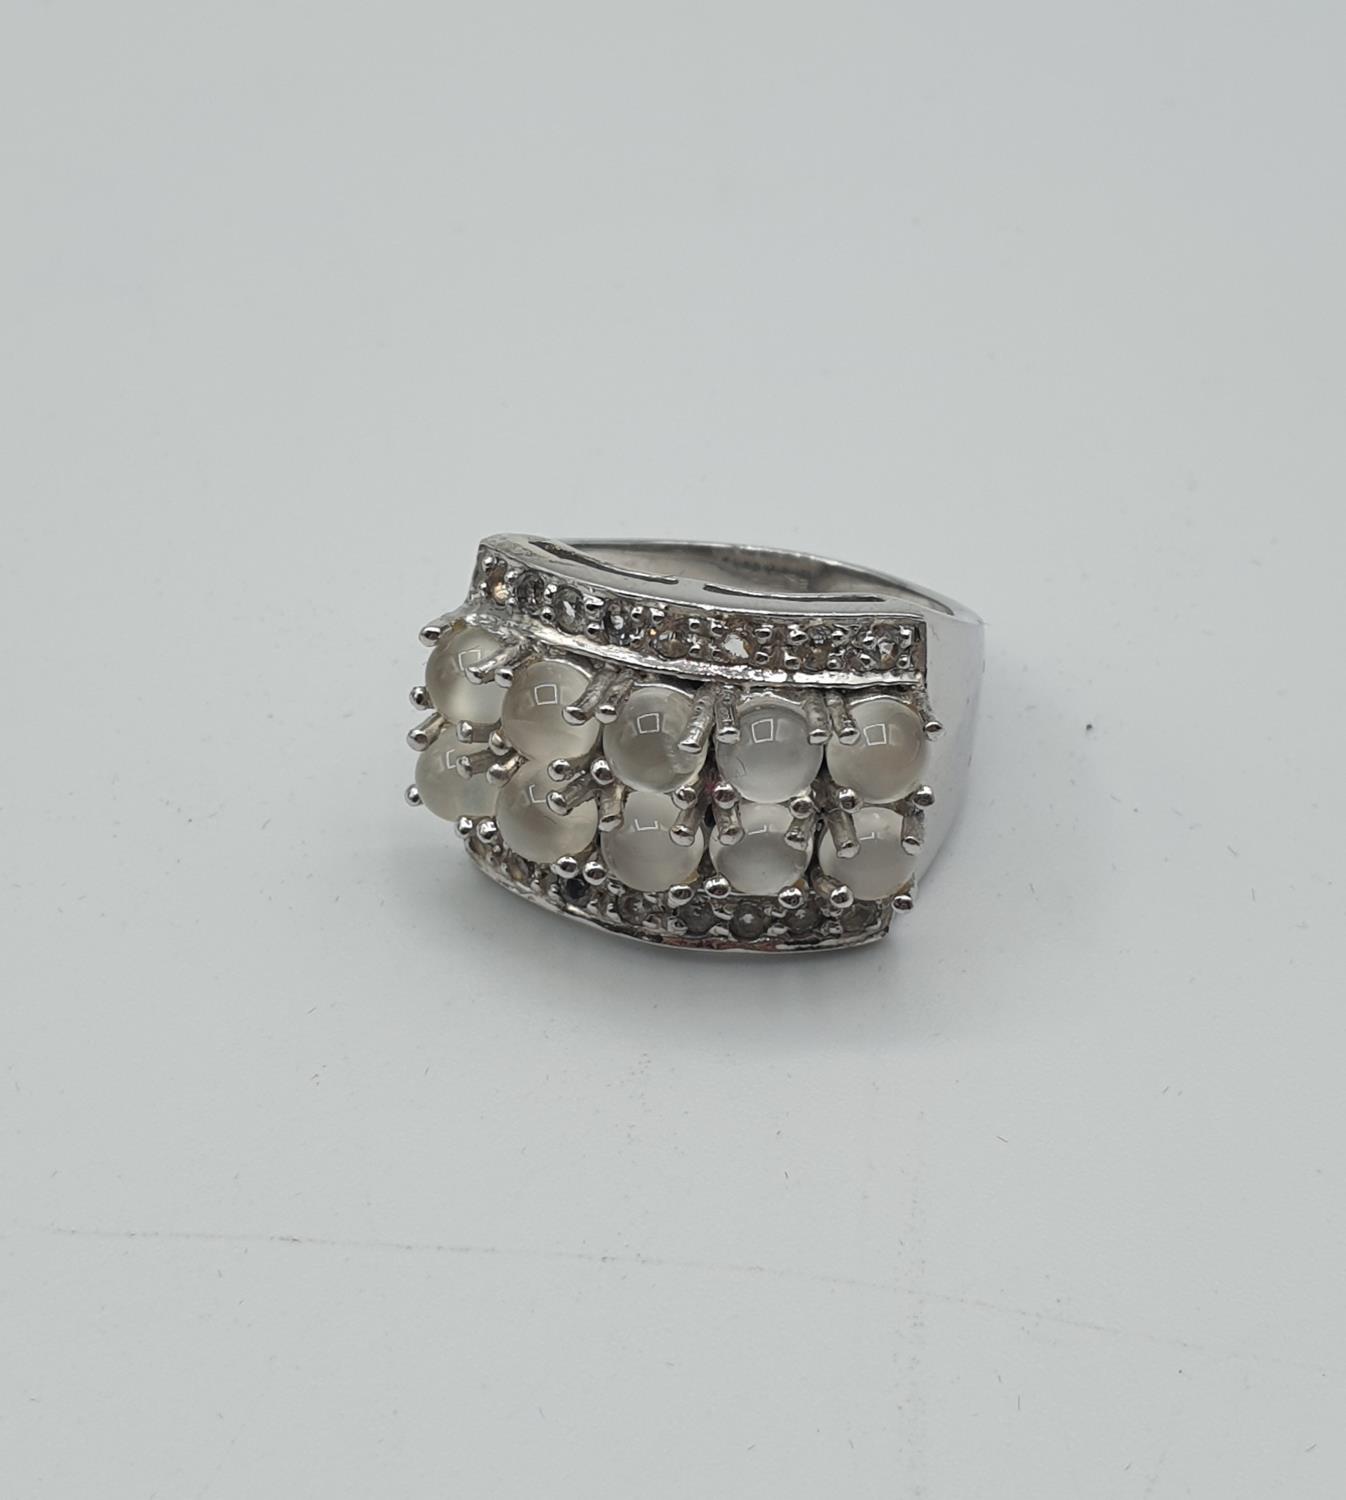 Stone set silver and moonstone ring having 10 stones bordered by two rows of clear stones. - Image 3 of 4